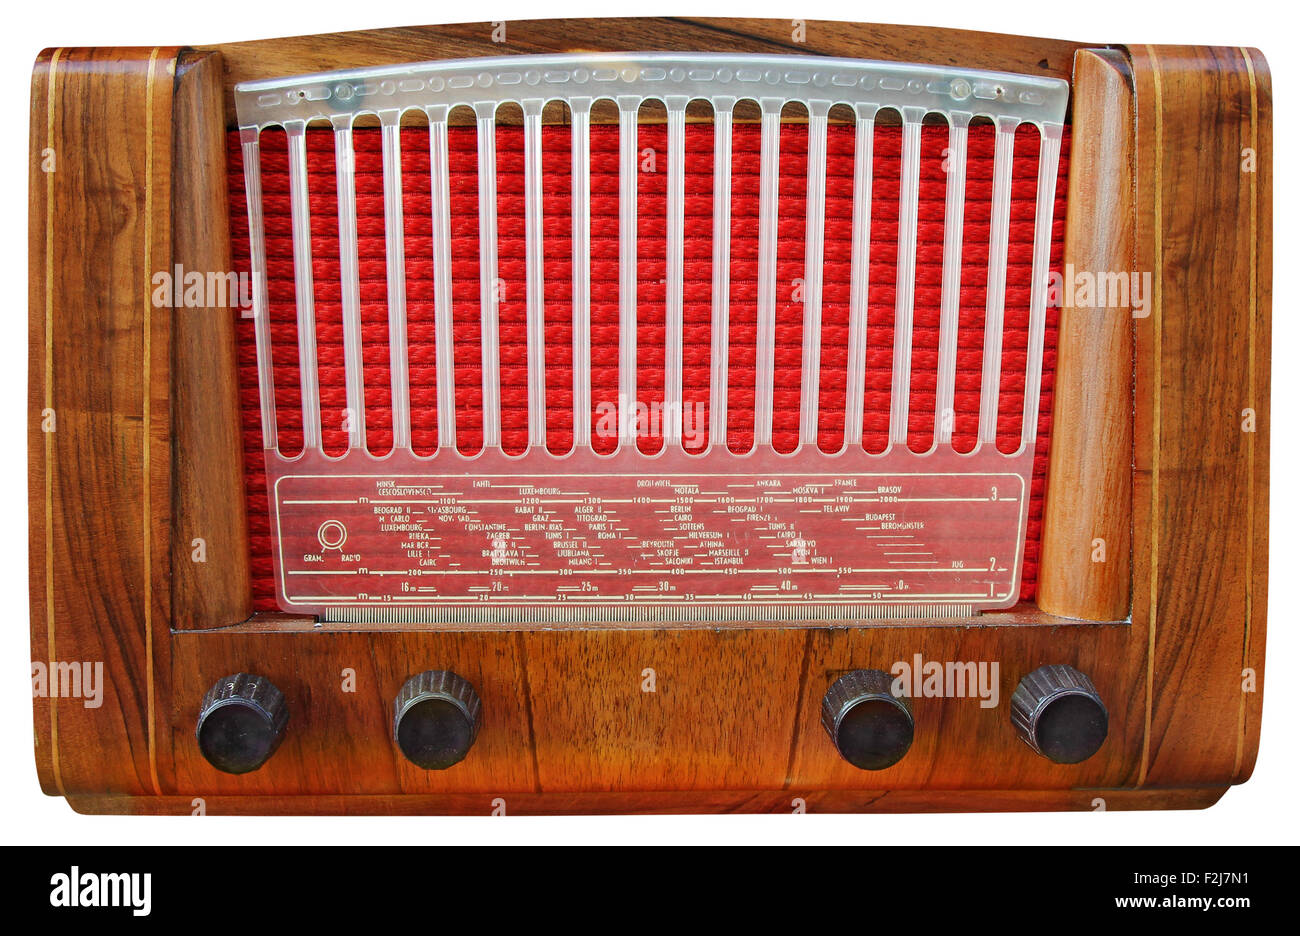 Vintage Old Wooden Tuner Radio Isolated on White Background with Clipping Path Stock Photo